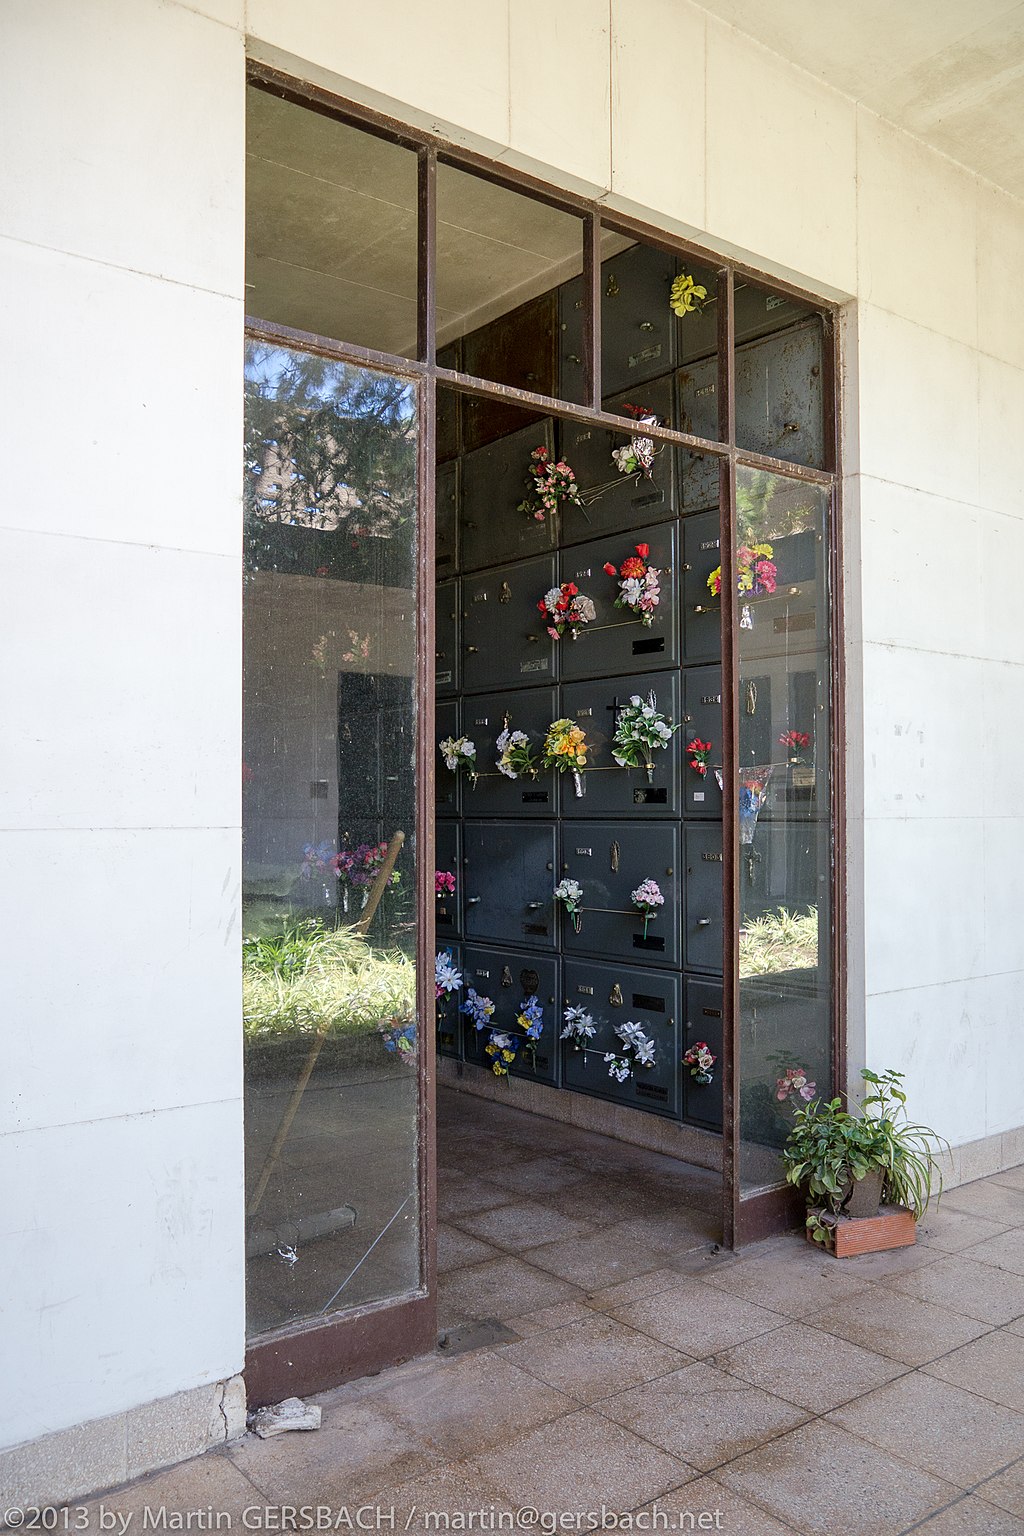 A wall of grave niches with bouquets of flowers.